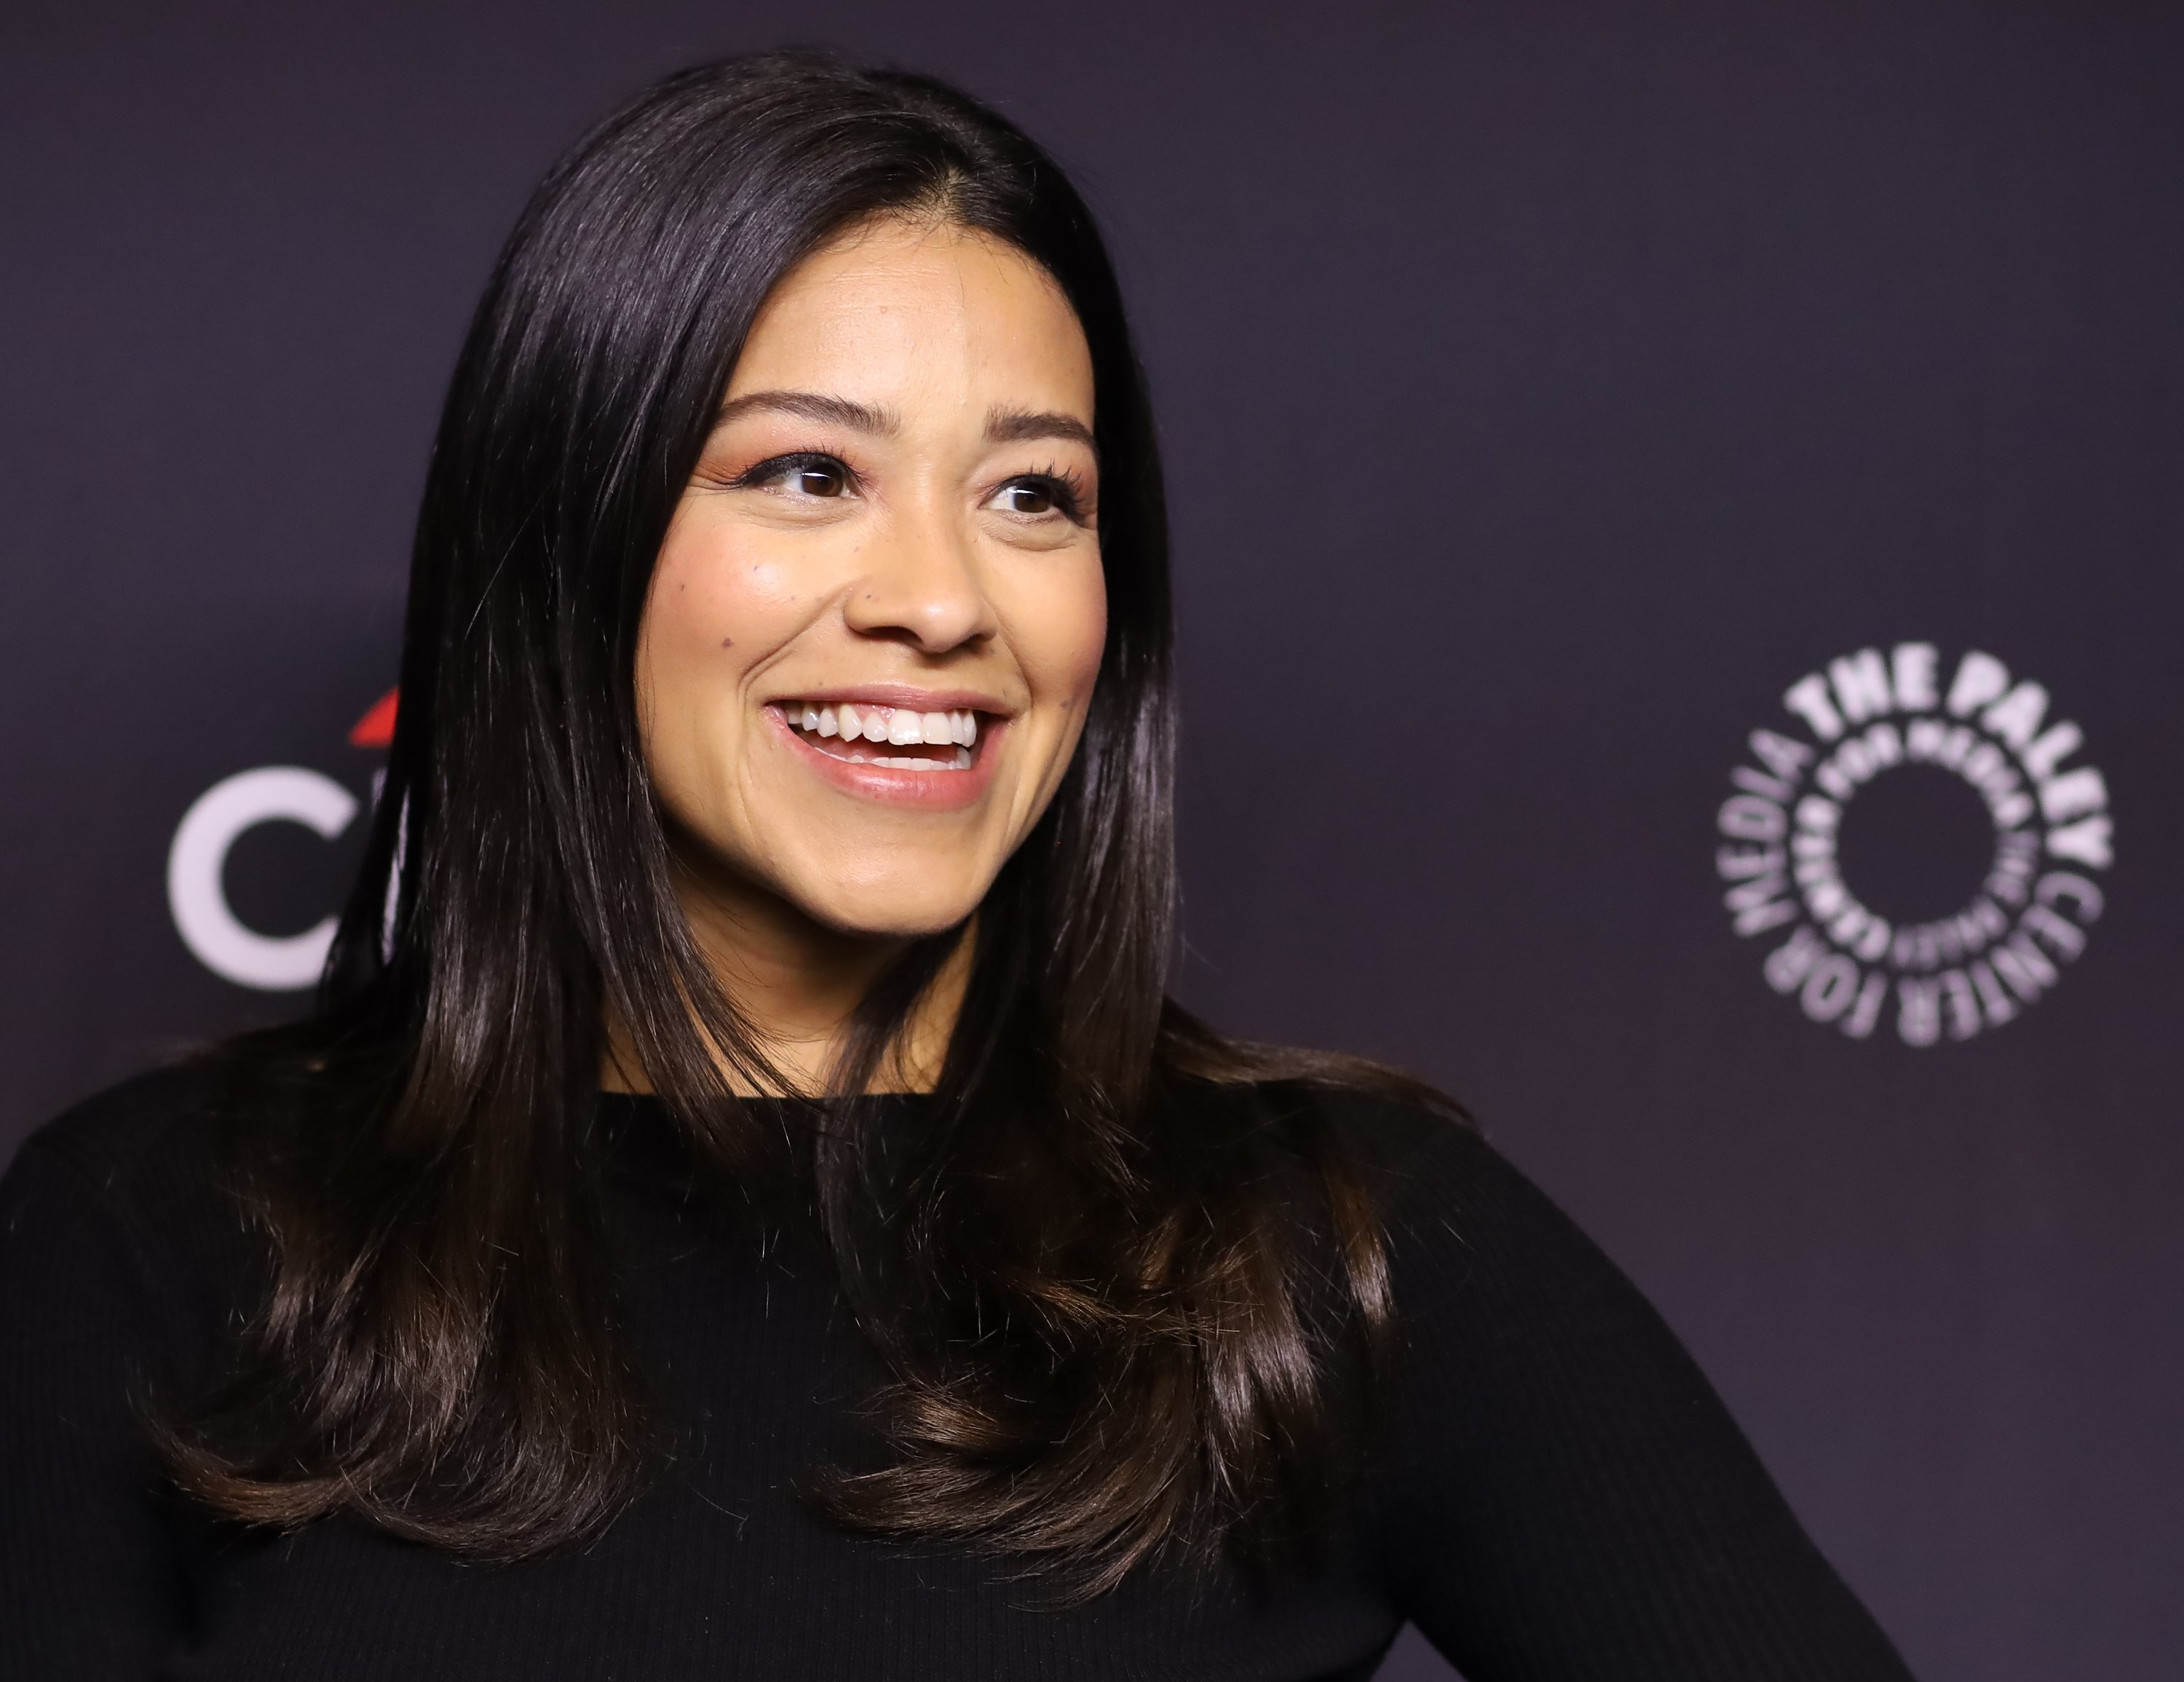 Gina Rodriguez of 'Jane the Virgin' attends the Paley Center For Media's 2019 PaleyFest LA